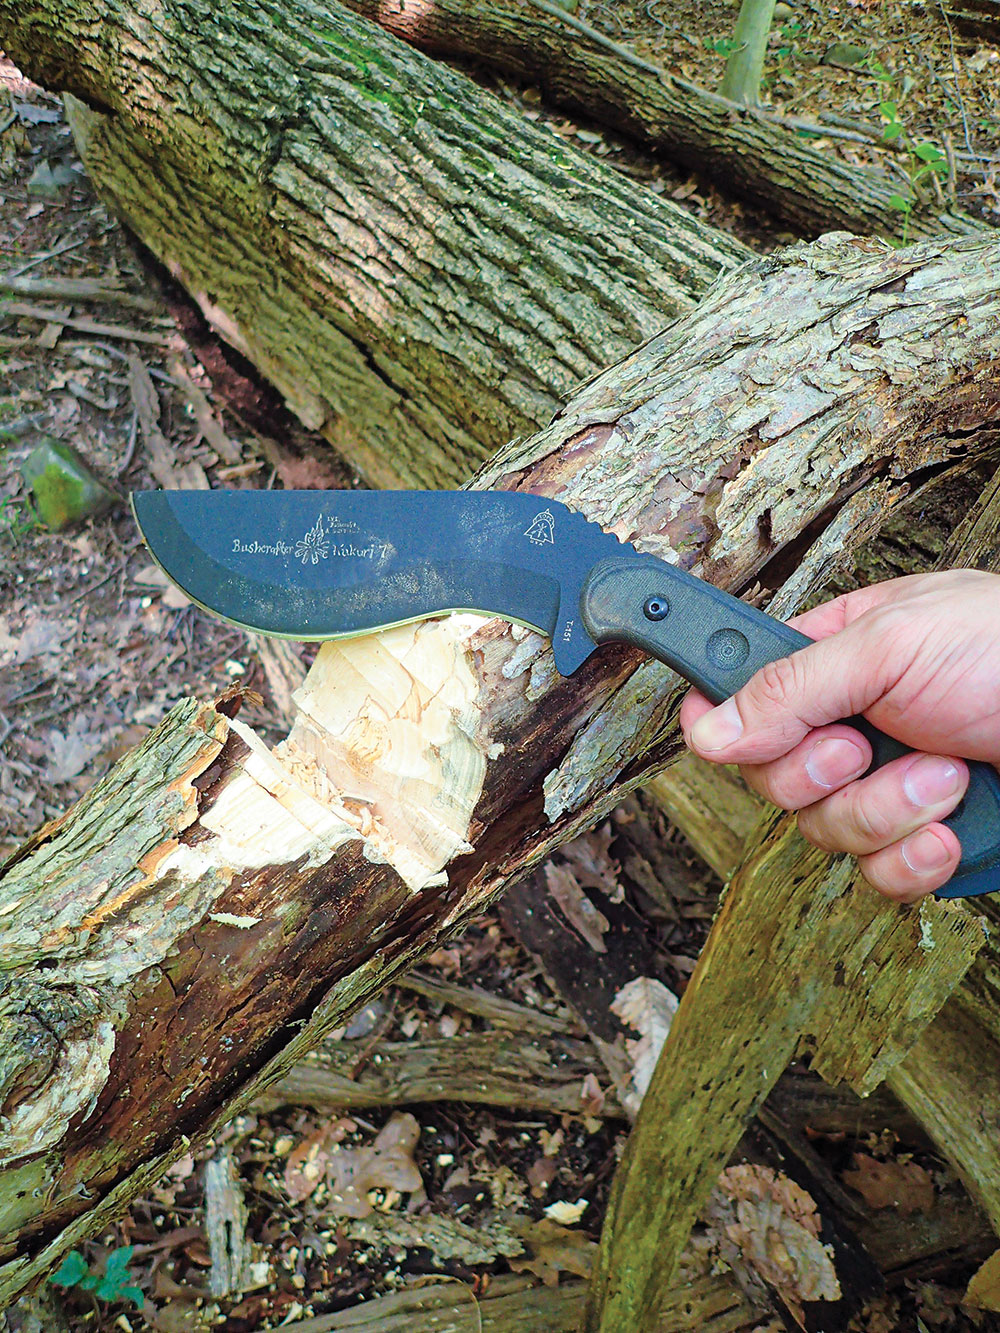 This southern hardwood was no match for the sheer power of the Bushcrafter Kukuri.